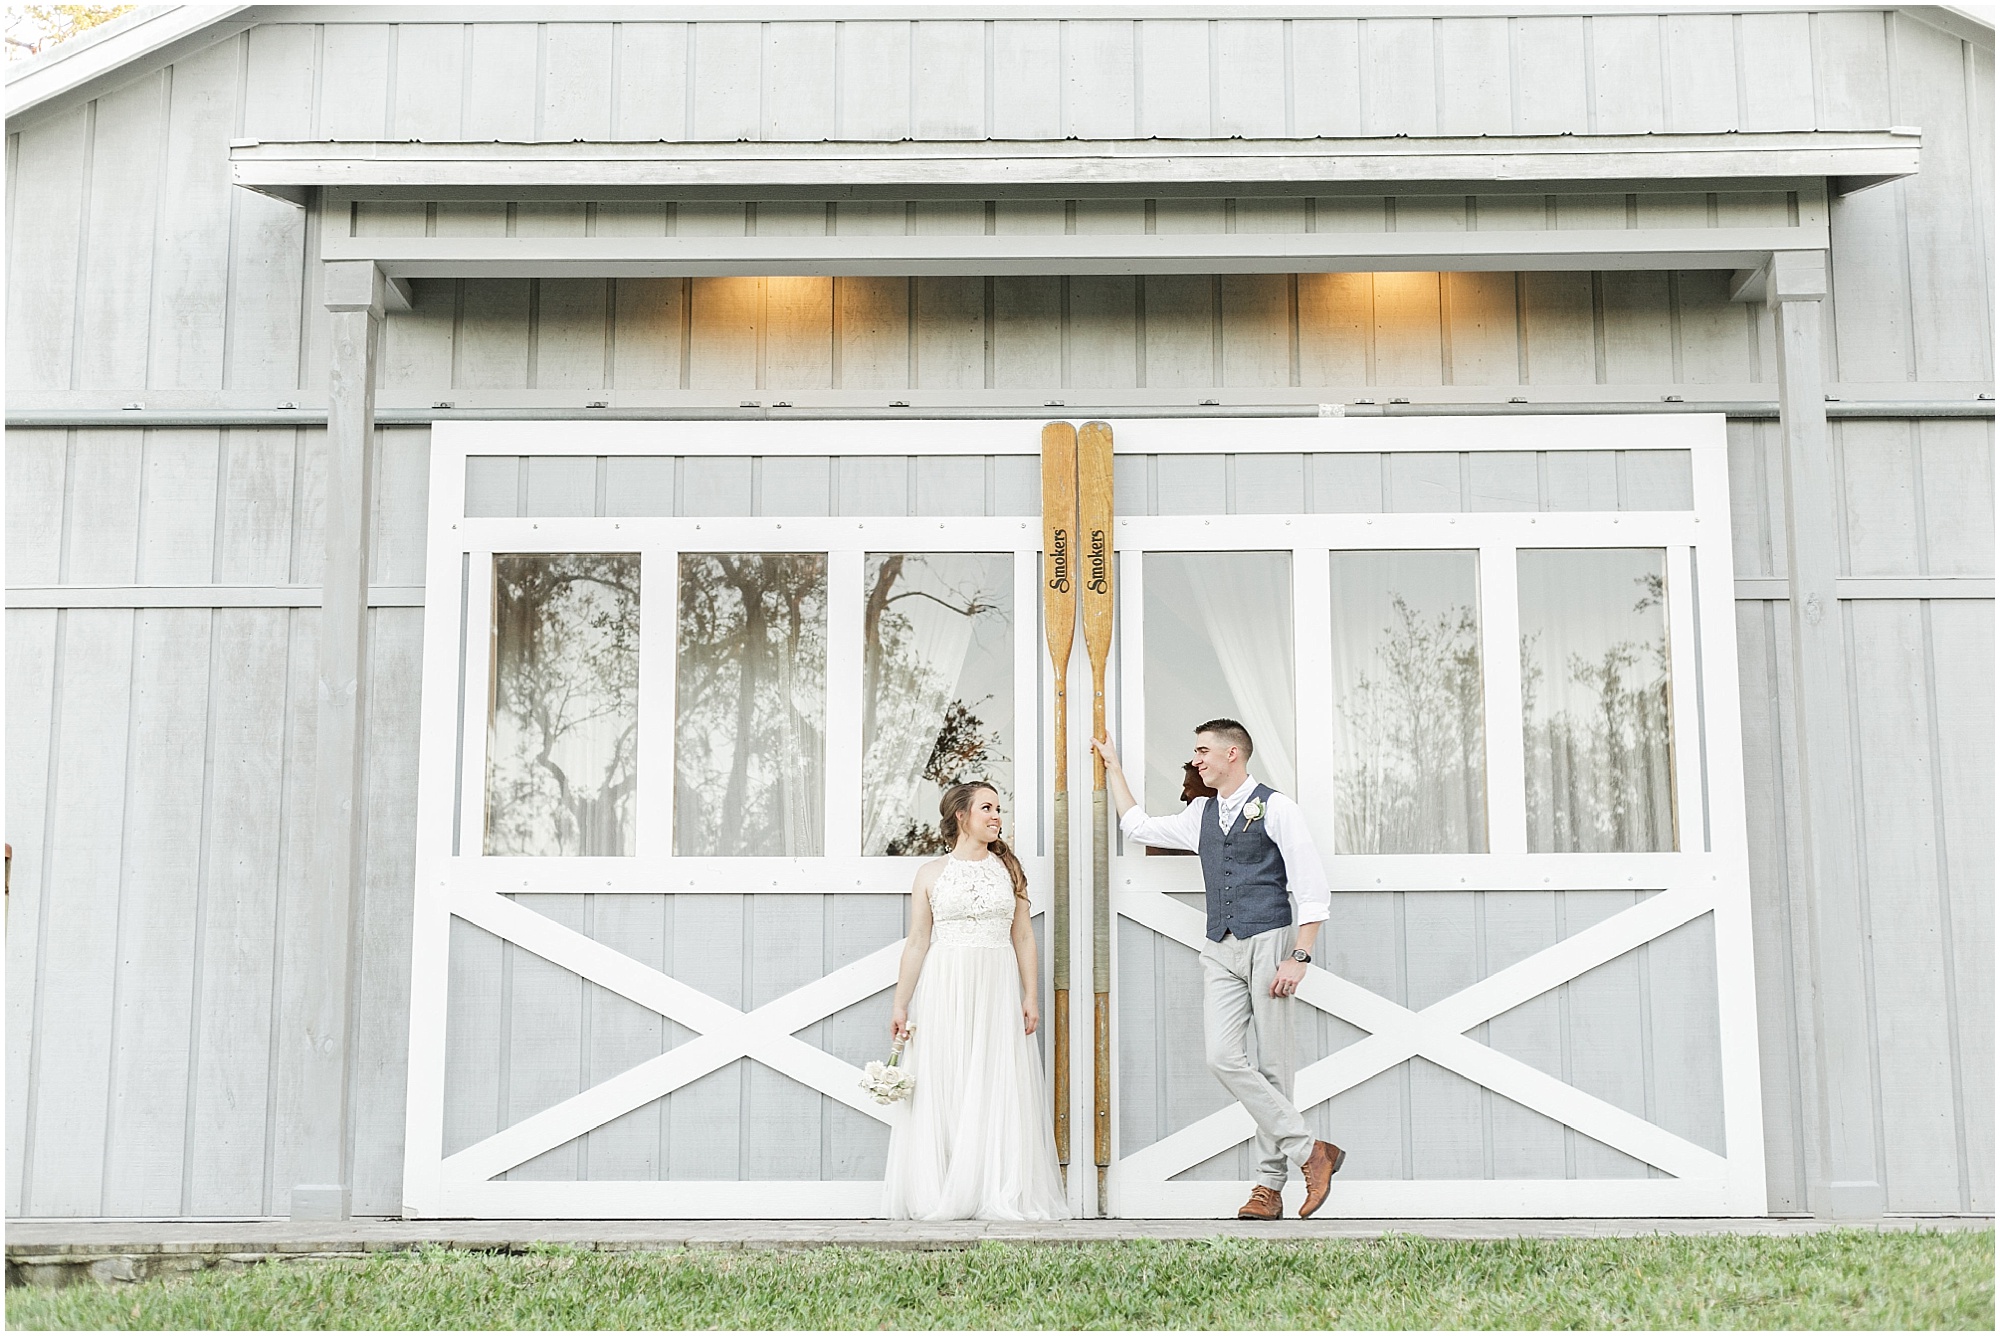 Top Five Central Florida Wedding Venues number one pick, Up the Creek Farms